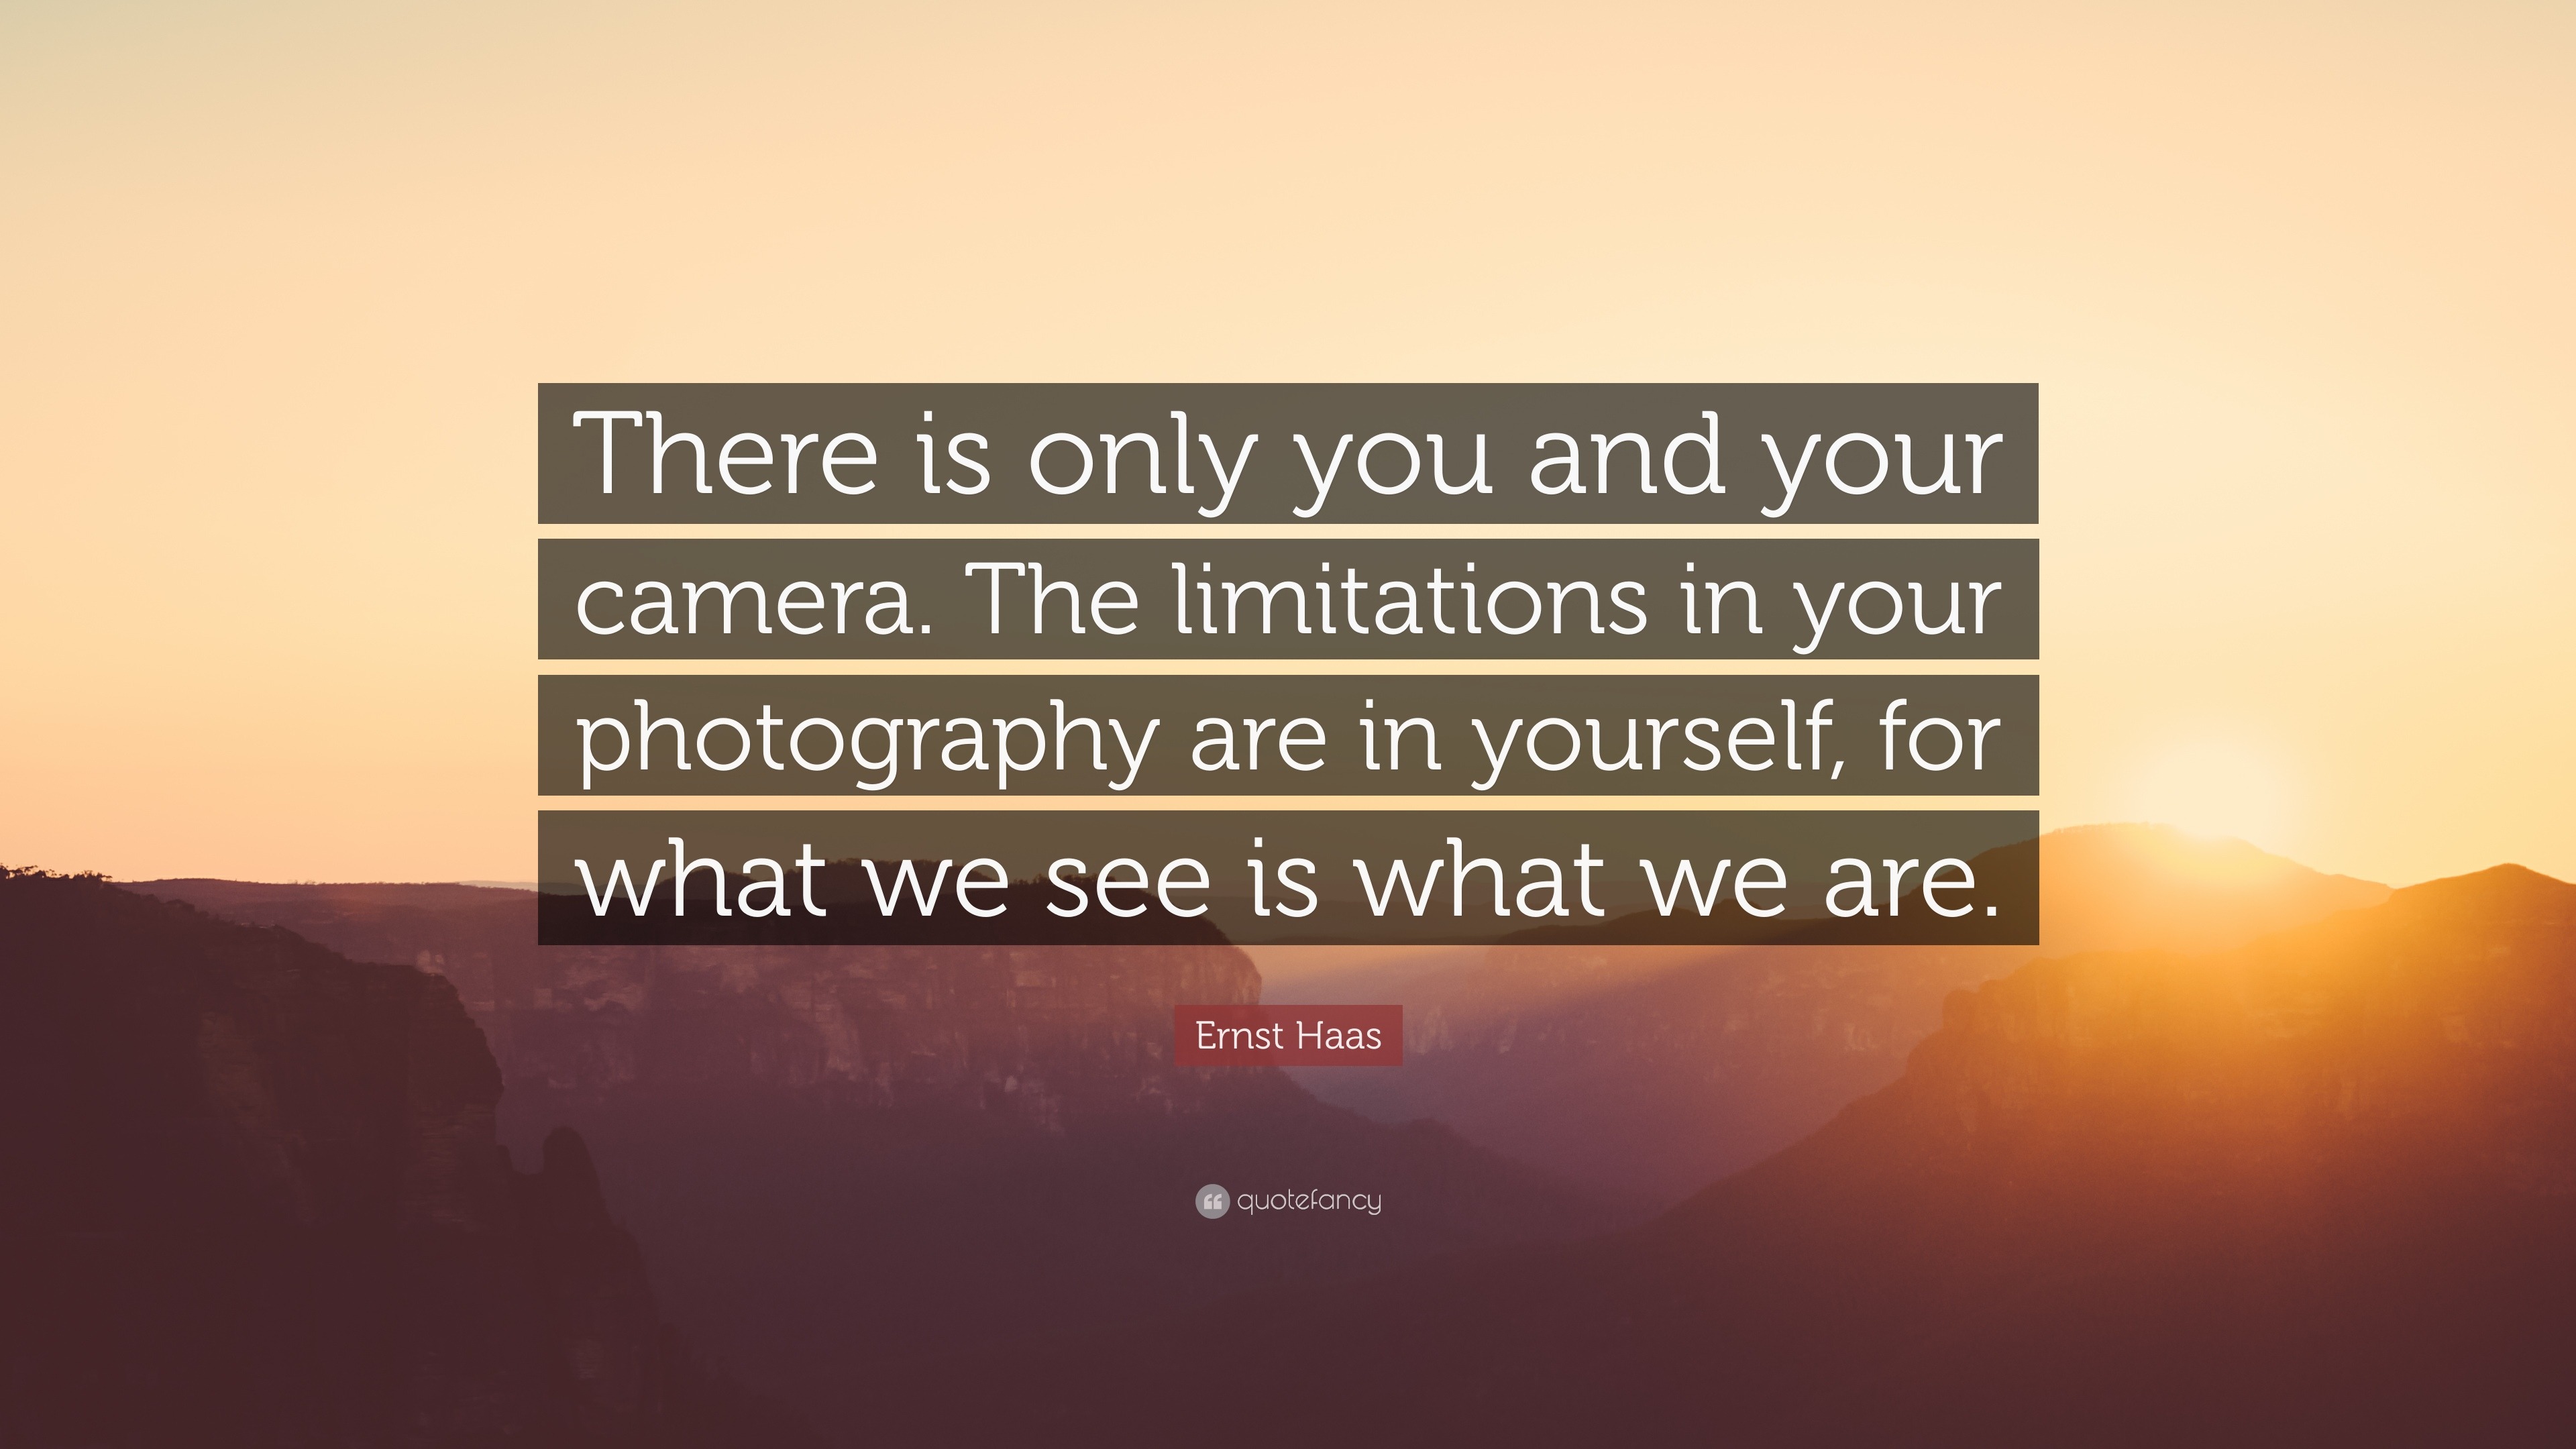 Ernst Haas Quote: “There is only you and your camera. The limitations ...